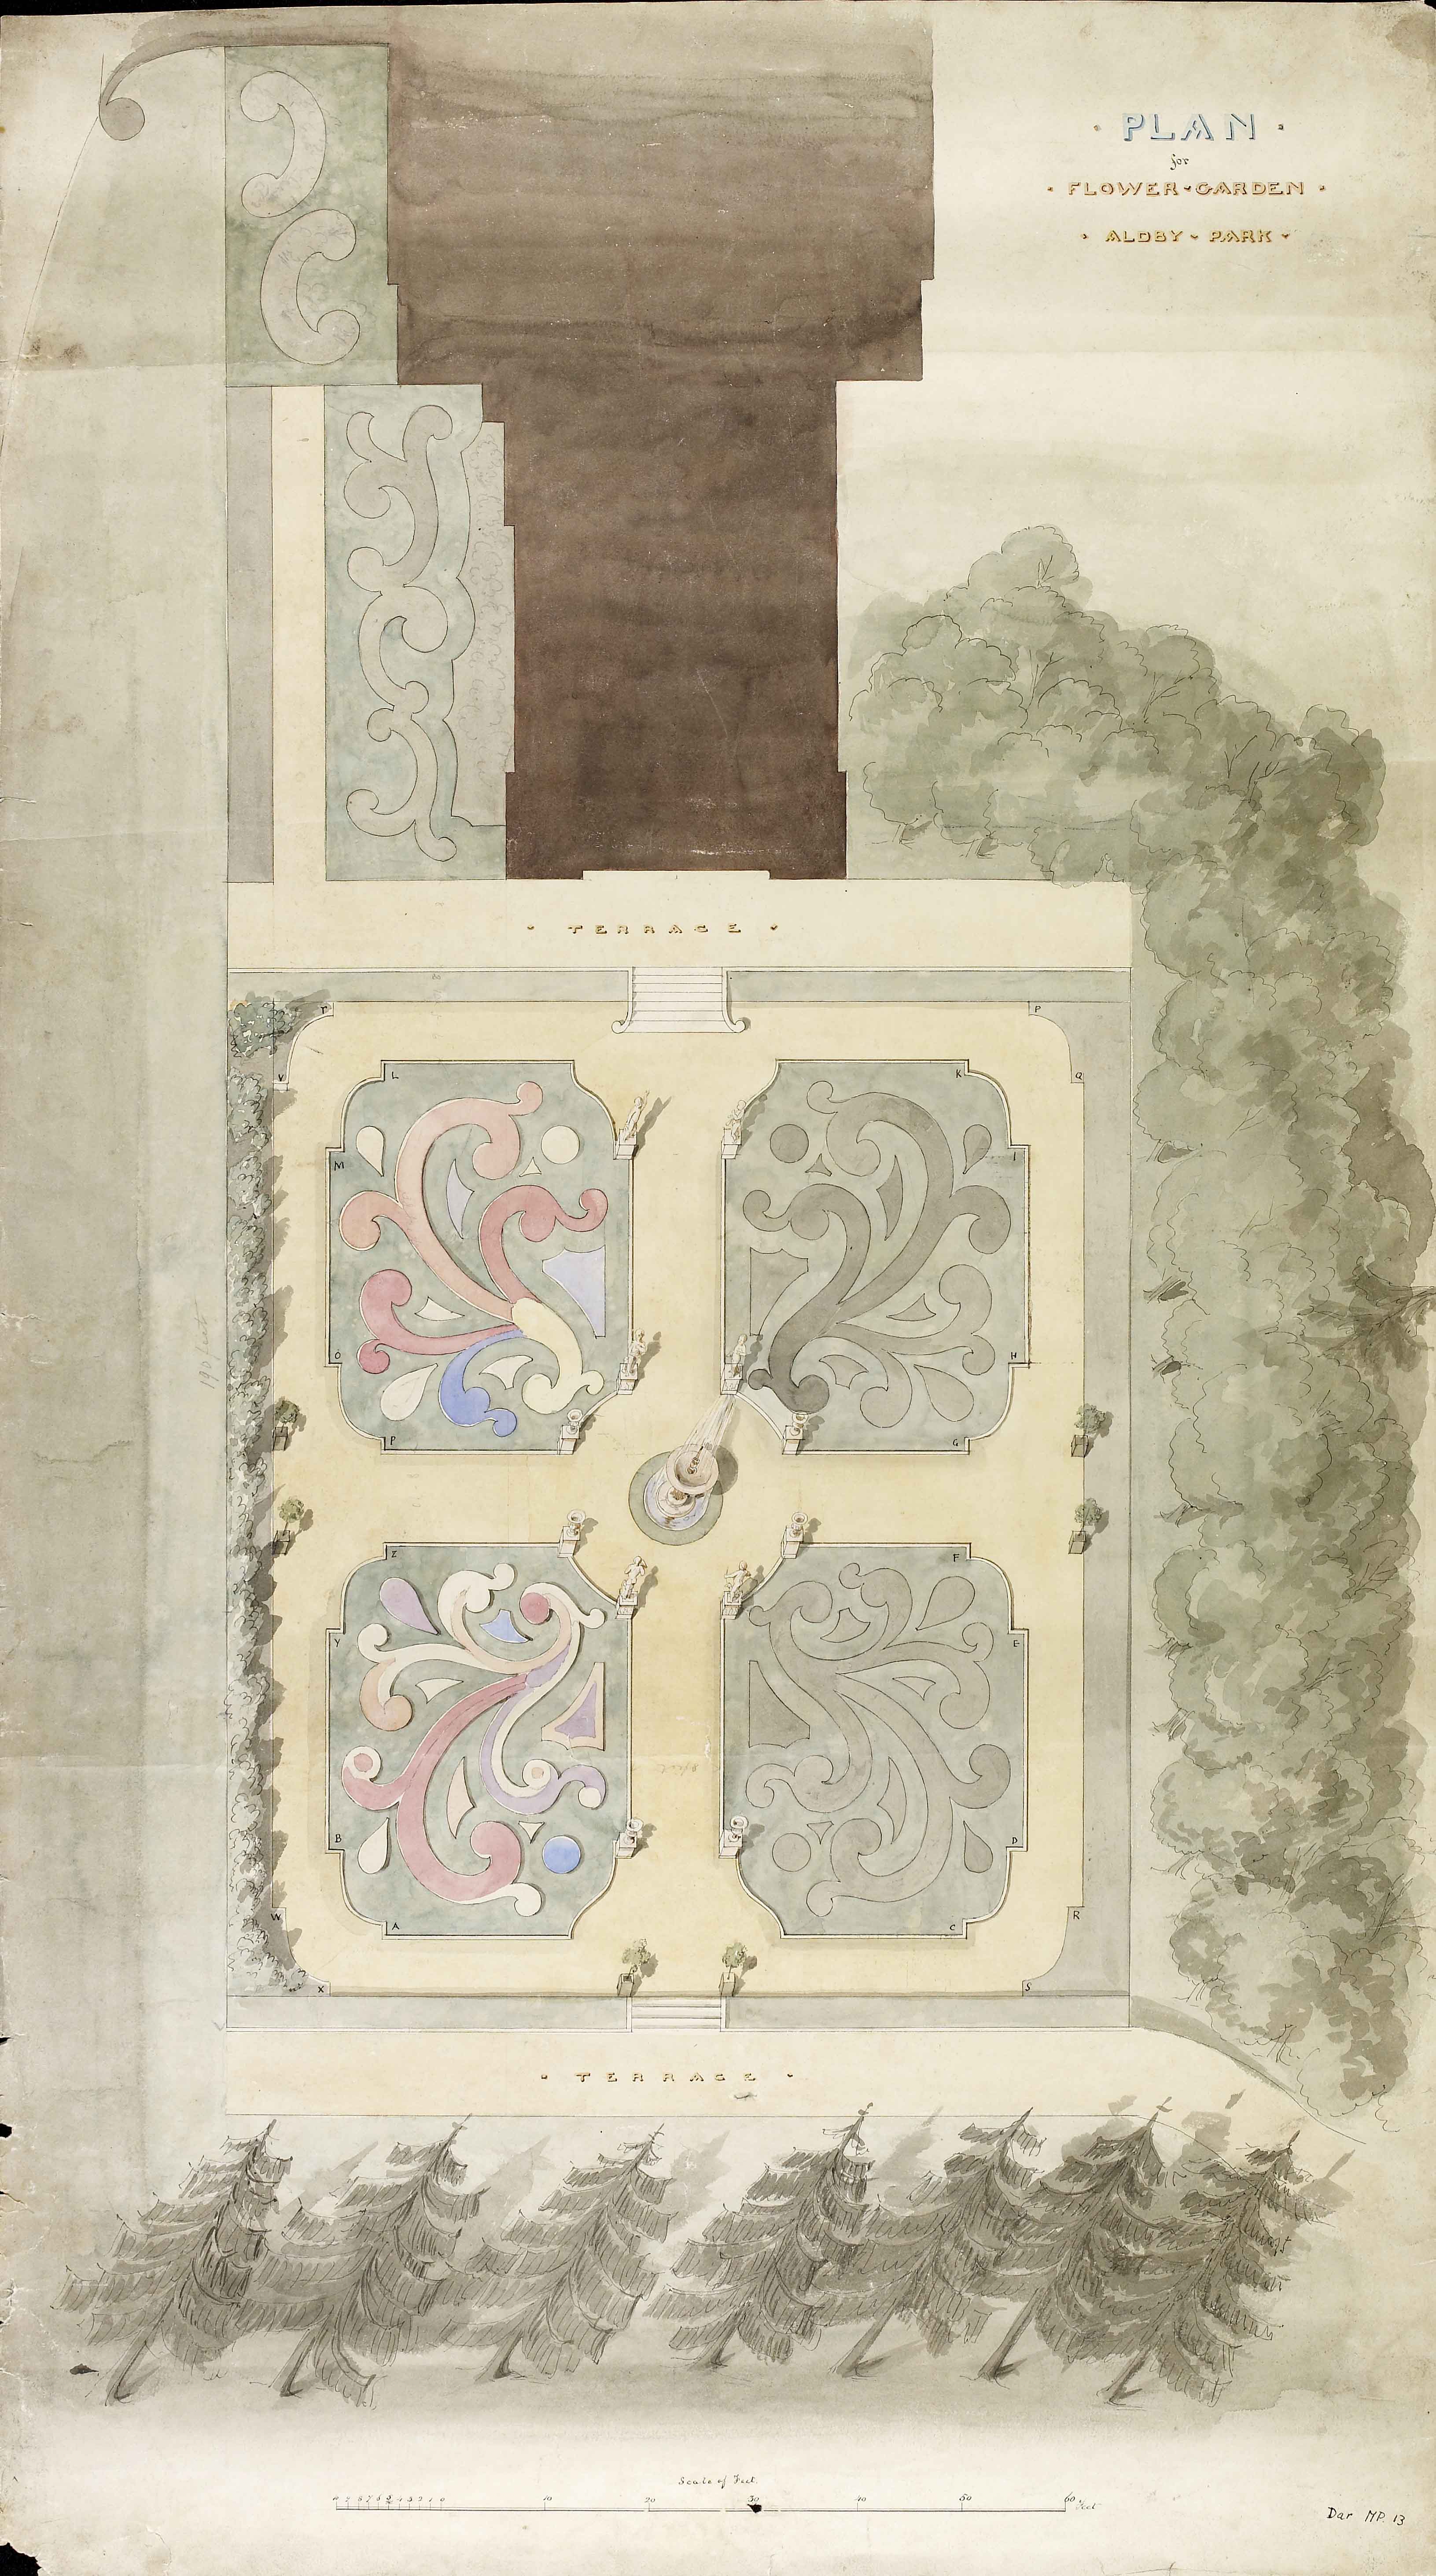 A plan of a flower garden at Aldby Park (no date, but thought to be circa 19th century), from the Darley family of Aldby archive.